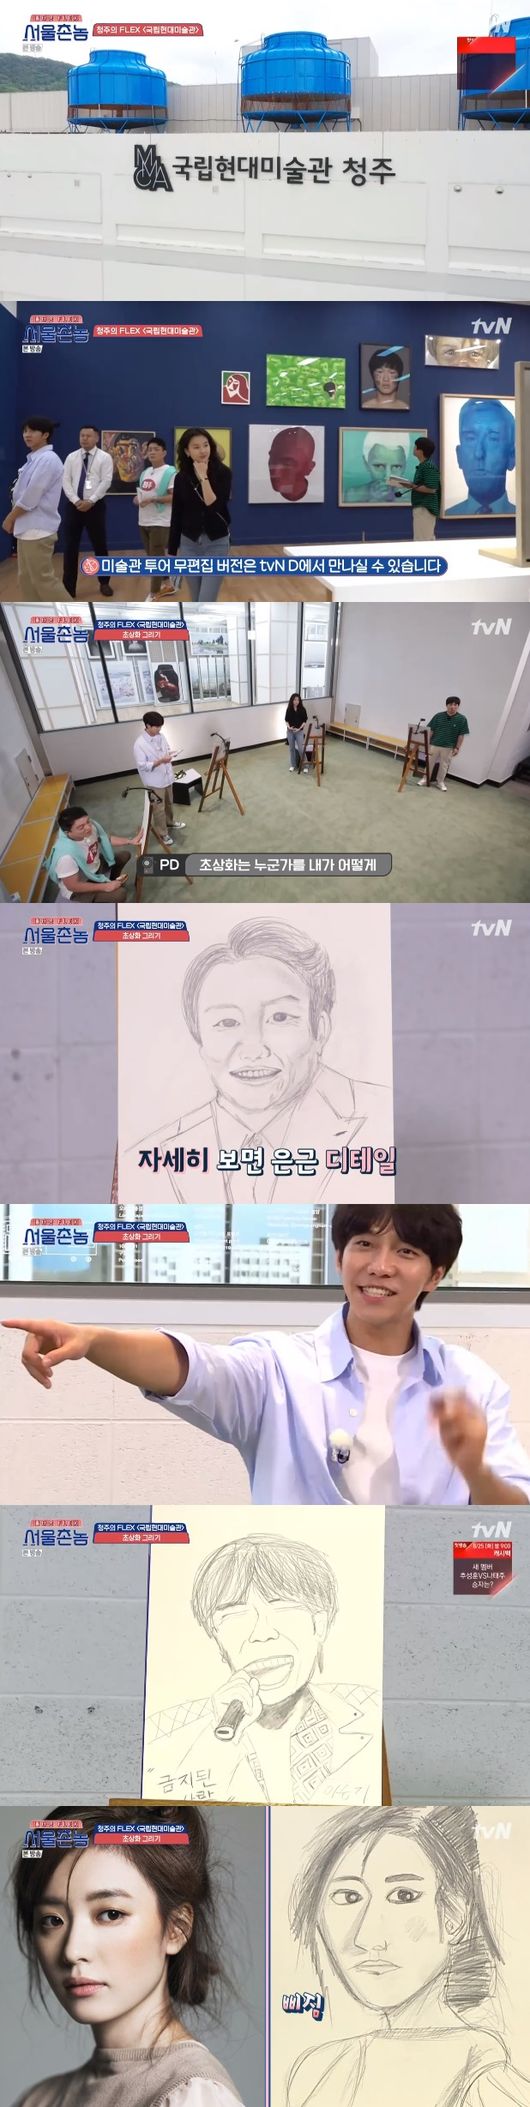 Lee Beom-soo x Han Hyo-jooo found Lee Seung-gi x Cha Tae-hyun and Cheongju Broadcasting attractions.On the 9th TVN entertainment Hometown Flex , Lee Beom-soo x Han Hyo-jooo, who introduces the Cheongju Broadcasting attraction, was portrayed.On this day, Cha Tae-hyun x Lee Seung-gi arrived at Cheongju Broadcasting Terminal and Han Hyo-jooo and Lee Beom-soo arrived in advance and prepared to greet the two.Han Hyo-jooo said, It was okay to decide to appear, and Lee Beom-soo said, I feel good because my hometown is introduced for the third time.The two were happy to meet Lee Seung-gi and Cha Tae-hyun, and Lee Seung-gi told Han Hyo-jooo, Its been a long time on our show?, so Han Hyo-jooo replied, Its the first time in such an entertainment.Lee Seung-gi said, Hyo Ju-rang is the same age as motive. The debut is the same. Its a private relationship.Han Hyo-jooo laughed, saying, I studied Cheongju Broadcasting to come out.Cha Tae-hyun wondered to the two, Chungcheong-do has no dialect, and Lee Beom-soo said, I swear: Chungcheong people dont think they use dialects.Were in the central region. I dont think I use it. But when I went to college, I saw my friends follow me.Han Hyo-jooo said, If you are the only dialect, put  on your mother. Draw it.Since then, four people have headed to the Seolungtang restaurant in the six-way market of Cheongju Broadcasting, recommended by Lee Beom-soo.Lee Beom-soo arrived in front of the store and said, I thought there was a high stairs when I was a child, but I did not.Han Hyo-jooo and Lee Beom-soo were happy to eat Seolleungtang, and the production team opened the instant Members Only, saying, I can not eat together.Han Hyo-jooo said, I do not seem to know me well.I do not know Dong-yi well, he said, and Lee Seung-gi laughed, saying, If there is hanbok, I will wear hanbok. The first citizen Choices Han Hyo-jooo, saying that he had no daughter, and the next citizen Choices Lee Seung-gi and then Han Hyo-jooo and Lee Beom-soo.Lee Seung-gi said, Wow, local power is scary, then contacted Na Young-seok Peedy from Cheongju Broadcasting and asked, When are you coming? And Na Young-seok Peedy said, I have to work too.Its night, he said. I explained the conversation of Cheongju Broadcasting people, and Lee Seung-gi said, Its like Hyoju said.Thats how everyone can meet, its amazing, he replied.Afterwards, Members Only continued and the Seaoul team reversed to lead 5:4. Han Hyo-jooo said: Im the last citizen.I have to win, he said, adding lipstick, Lee Seung-gi said, Hey, stop it. Fortunately the last citizen finished with a 5:5 with Han Hyo-jooo Choices.The production team responded, Cheongju Broadcasting is like a city in the middle of the city. Lets eat Seolungtang together.Since then, the four have headed to Central Park, a memorable spot recommended by Lee Beom-soo.Lee Beom-soo was thrilled to say, It seems to be coming here in 30 years. He recalled the days when he painted in front of Cheongnyeonggak in the first three years and soon released the pictures he painted in those days.Lee Beom-soo looked at the painting and the three people admired it, and Lee Beom-soo said, It was an art department. In those days, I was upset because I was only drawing pictures.Four people then ate hodok and Han Hyo-jooo said, No one knows this place in Cheongju Broadcasting.After eating hodok, he moved to the iron bar. Lee Beom-soo and Han Hyo-jooo explained, Its a meeting place.Upon arriving at the iron bridge, Han Hyo-jooo explained what he had studied and Lee Seung-gi praised him for studying properly.This is where we came from on shooting for a night and two days, Cha Tae-hyun said, while the production team said, The iron millennium is a thousand years old; people gather here.Han Hyo-jooo said, Not only this, but there are many artifacts here; the place where the Jikjimseng was found is the first printed copy of the metal type. 1377. This is a great city.Then Lee Seung-gi said, Youre going to be a public relations ambassador.Then, Han Hyo-jooo headed to the National Museum of Contemporary Art Cheongju Broadcasting, recommended by Han Hyo-jooo. Han Hyo-jooo said, I do not know, but the energy of the museum is so good.Its been too long, and the four people admired the work.During the art appreciation, the crew suggested drawing portraits and the four seriously painted after Choices the grille.Han Hyo-jooo painted a smiling Lee Beom-soo face while Cha Tae-hyun painted the face of a passionate Lee Seung-gi.Lee Seung-gi laughed, saying, Youre a wen monkey, Ive drawn the best microphone.Lee Beom-soo painted Cha Tae-hyun and Cha Tae-hyun said it was so scary.Lee Seung-gi painted Han Hyo-jooo and Han Hyo-jooo responded firmly, Its cool, but its not like me.Lee Beom-soo, painted by Han Hyo-jooo, was voted first by the audience vote.Since then, Han Hyo-jooo and Lee Beom-soo have said that they want to go to the Yulyang-dong x Seokgyo-dong where they lived, and Cha Tae-hyun headed to Lee Beom-soo and Seokgyo-dong and Lee Seung-gi headed to Han Hyo-joo and Yulyang-dong.Lee Beom-soo went to his old place and missed his father who left, saying, I think of my parents youth, is not it the most active time?Han Hyo-jooo, who arrived in the neighborhood where he lived, told Lee Seung-gi, Its a real memory, a memory, a bleak bleak bleak.I feel strange, he said, and eventually he went to the school where he went to and shed tears that he had endured while recalling the old days.